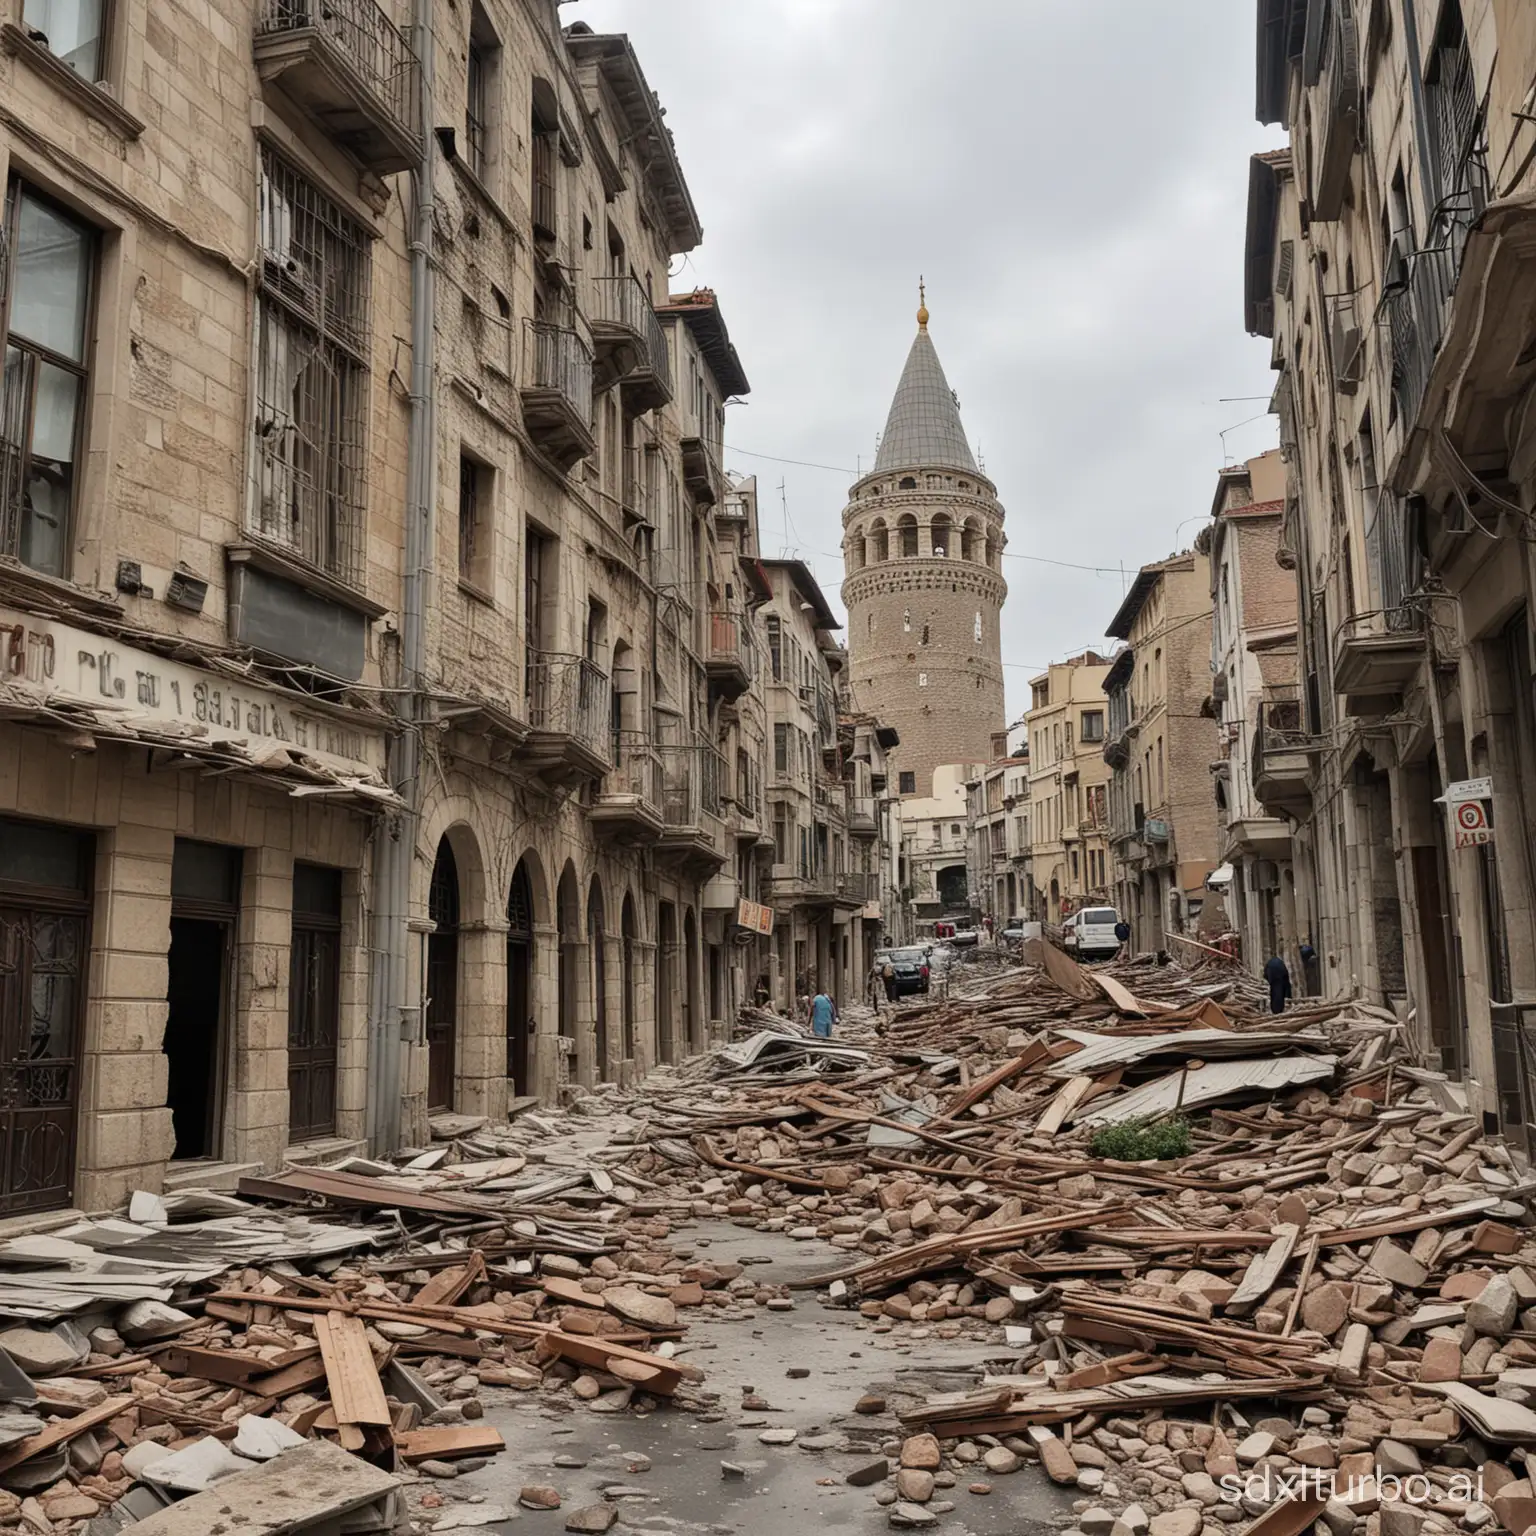 collapsed and ruined buildings around the Galata Tower in Istanbul